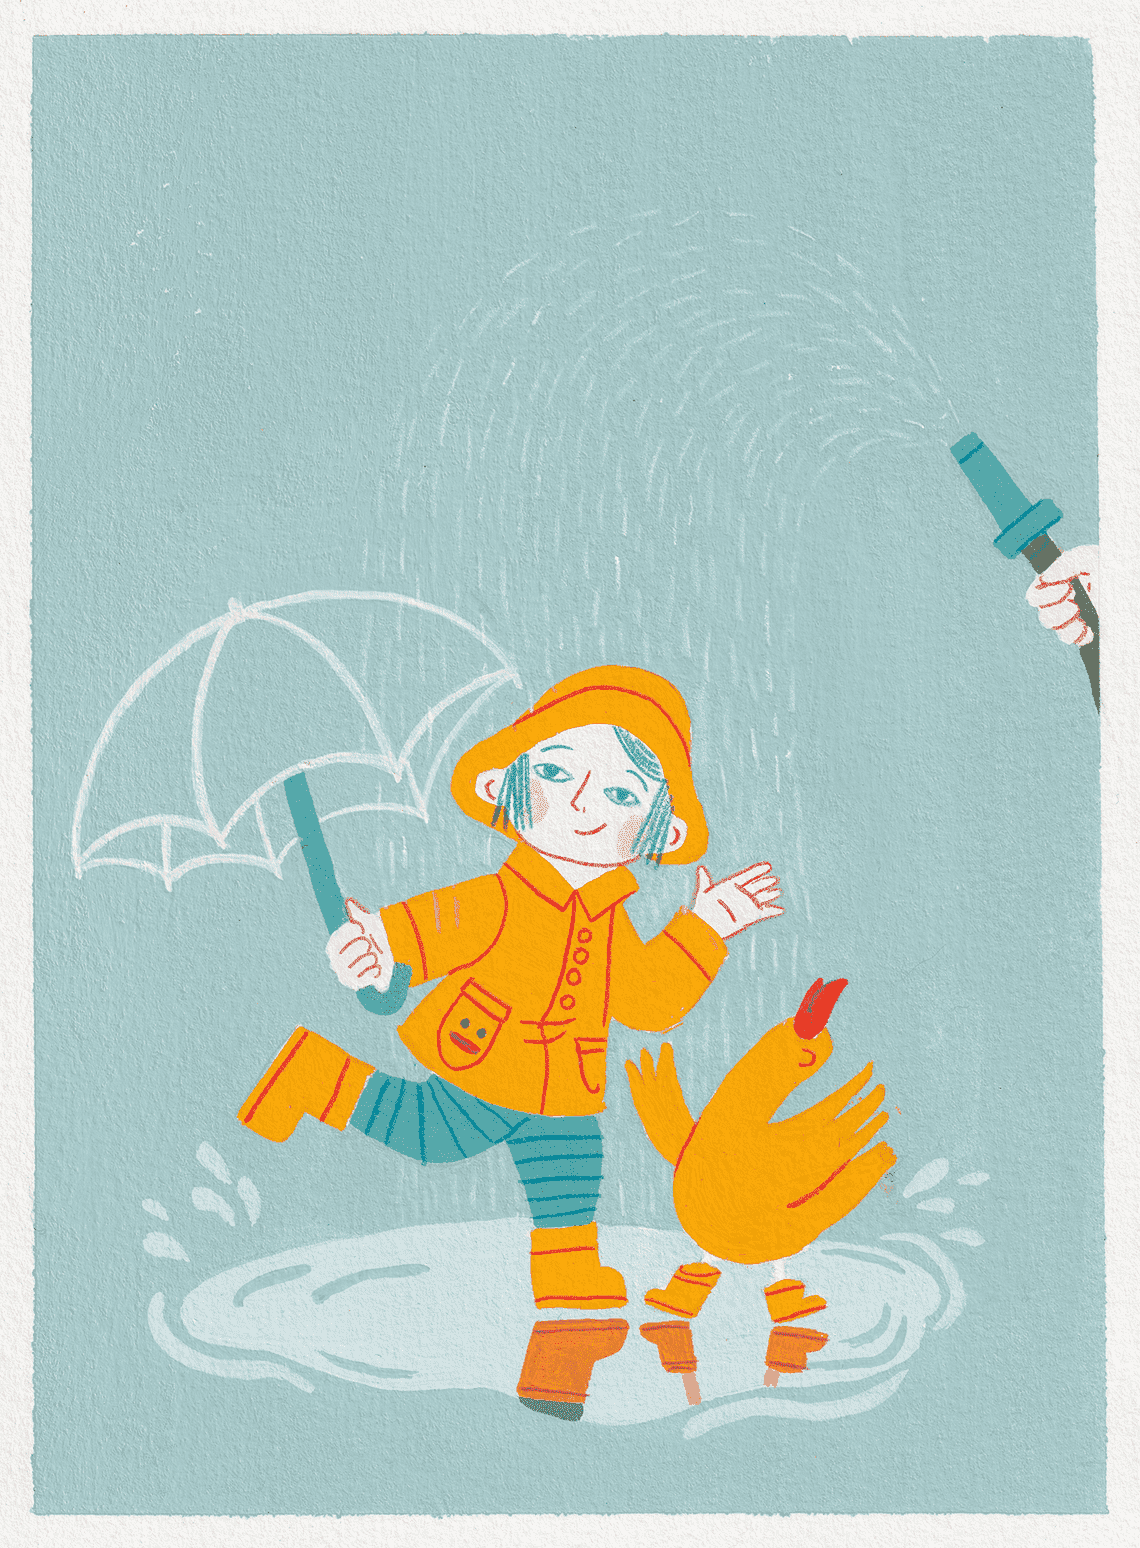 Gouache illustration of a girl playing with her pet friend in a bubble created by a hose.